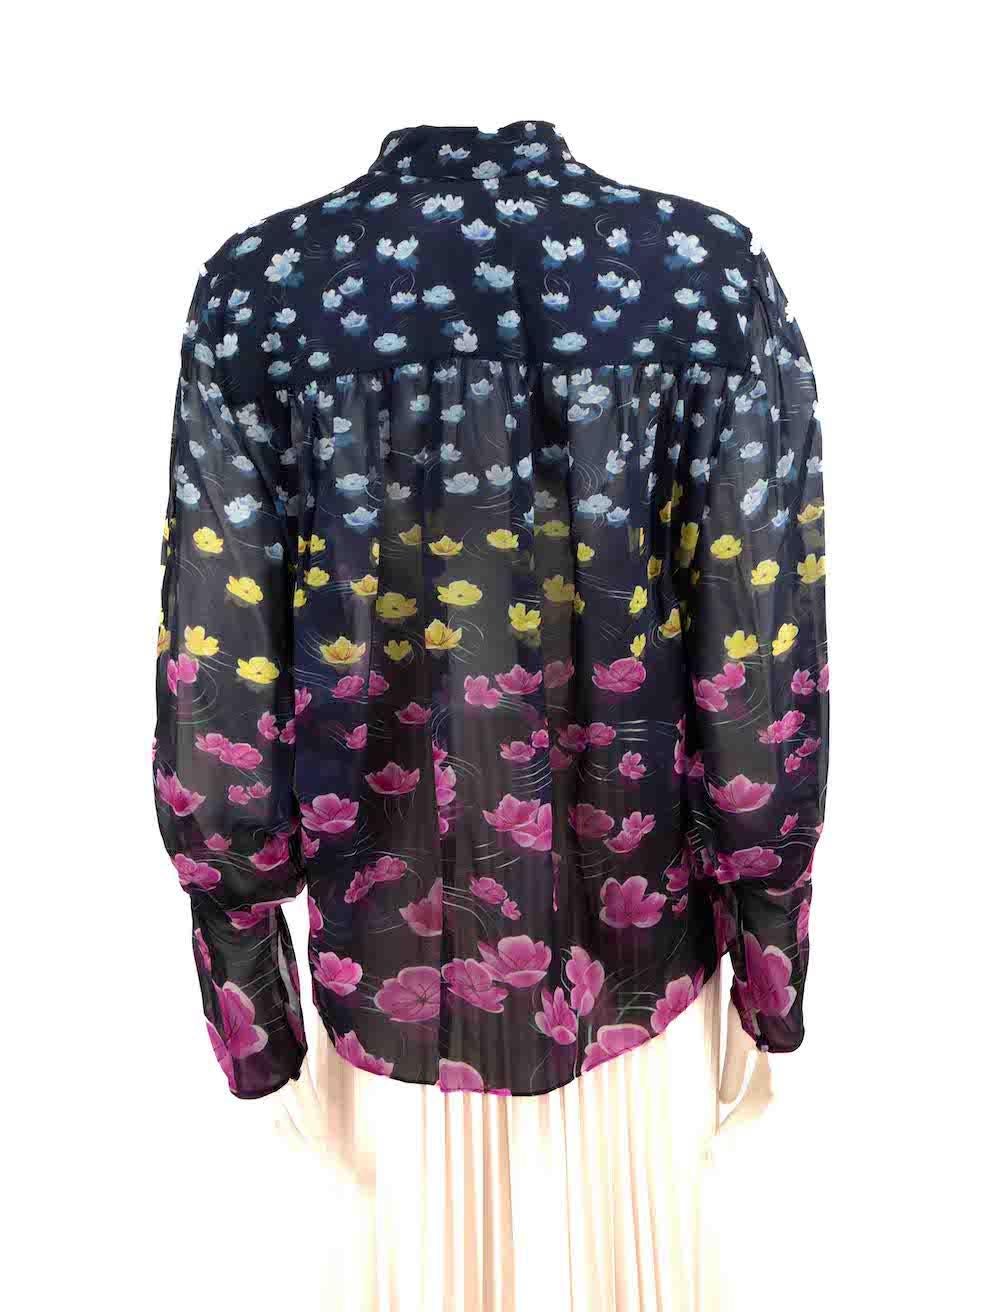 Mary Katrantzou Floral Print Silk Sheer Blouse Size L In Good Condition For Sale In London, GB